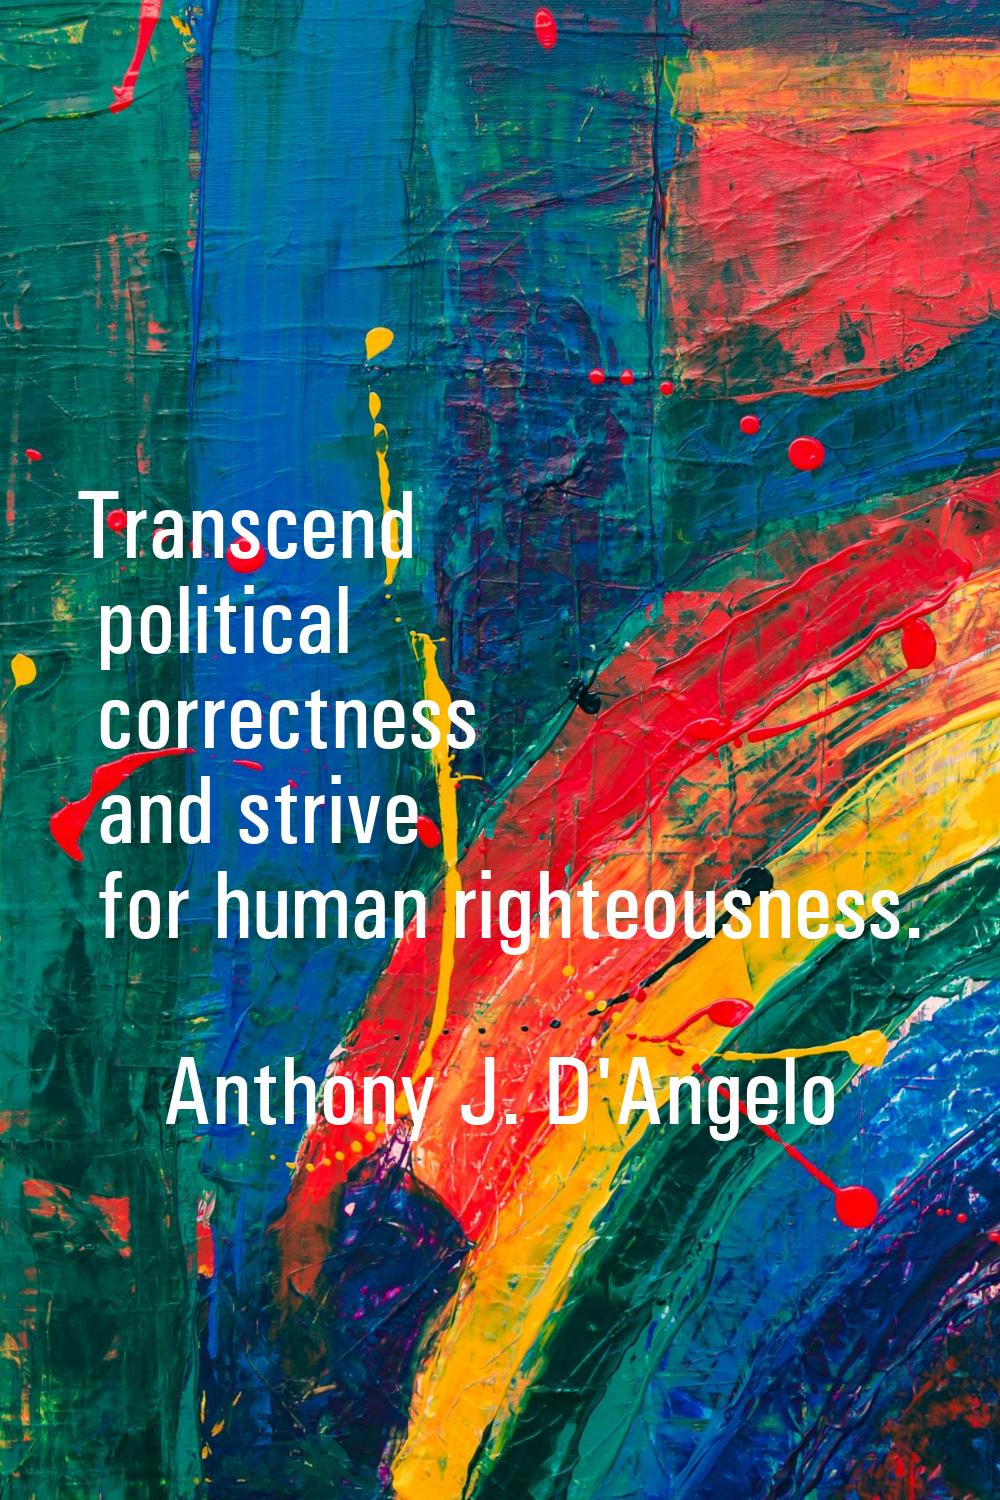 Transcend political correctness and strive for human righteousness.